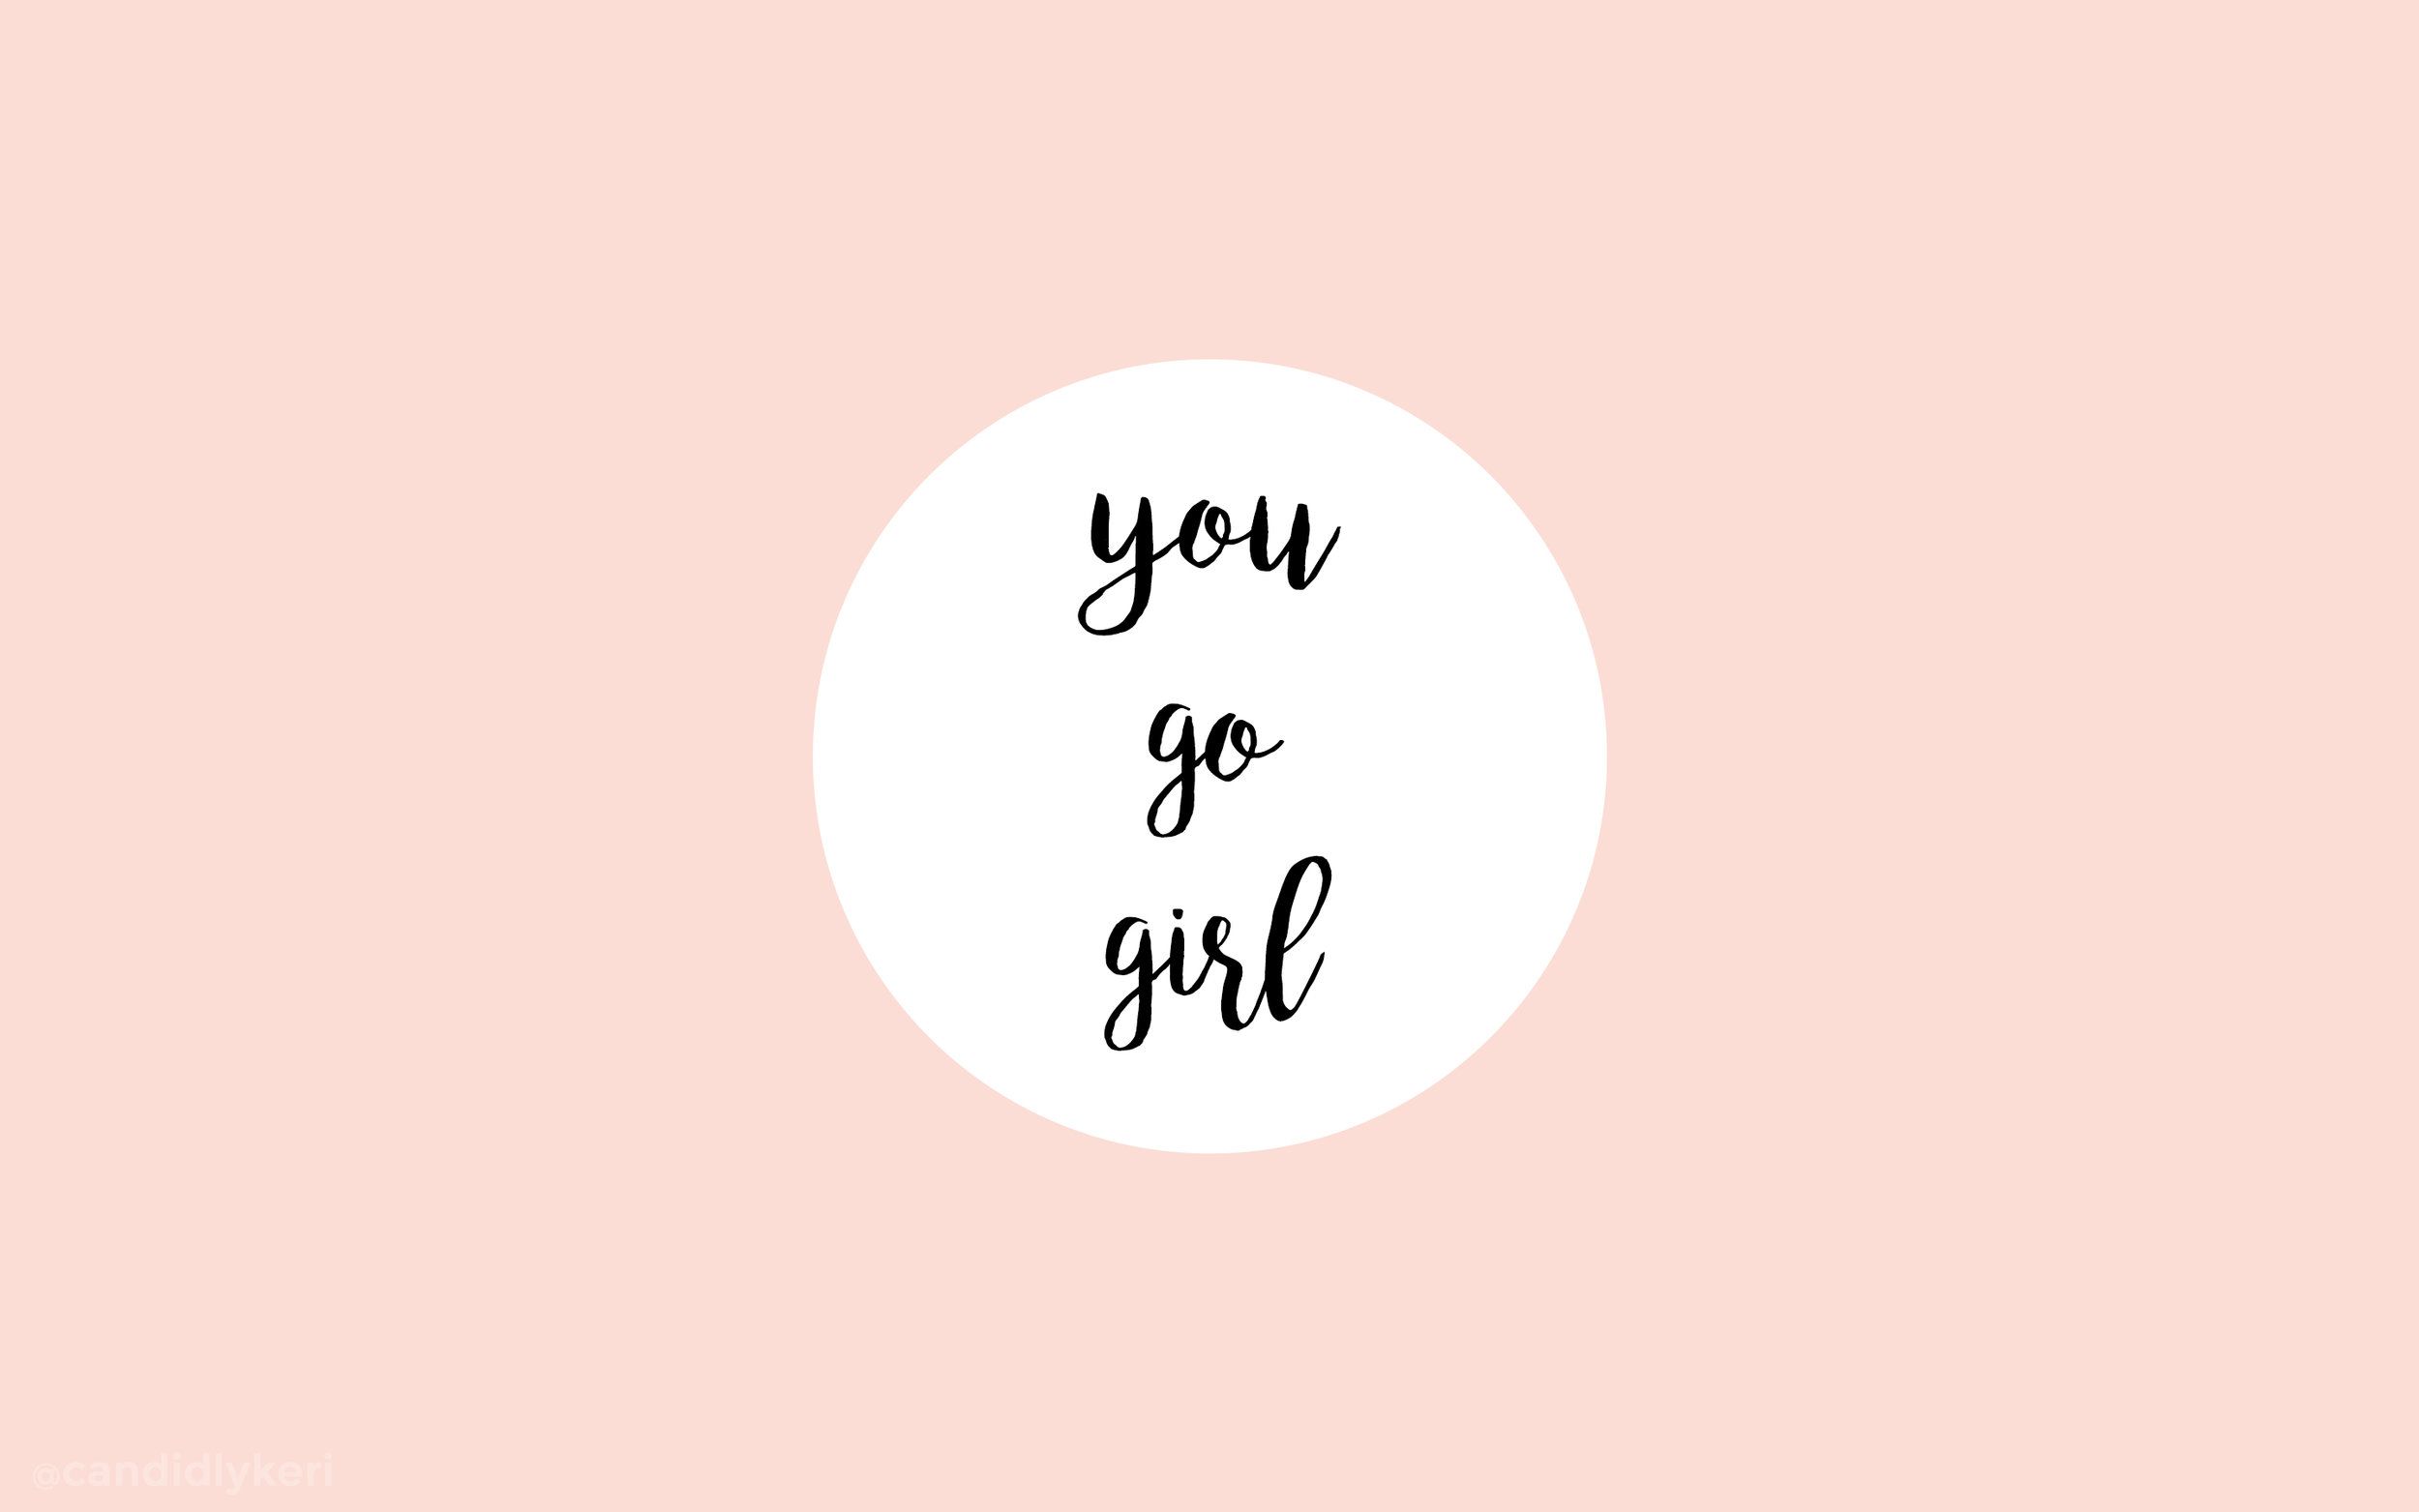 You Go Girl Images Free Wallpapers